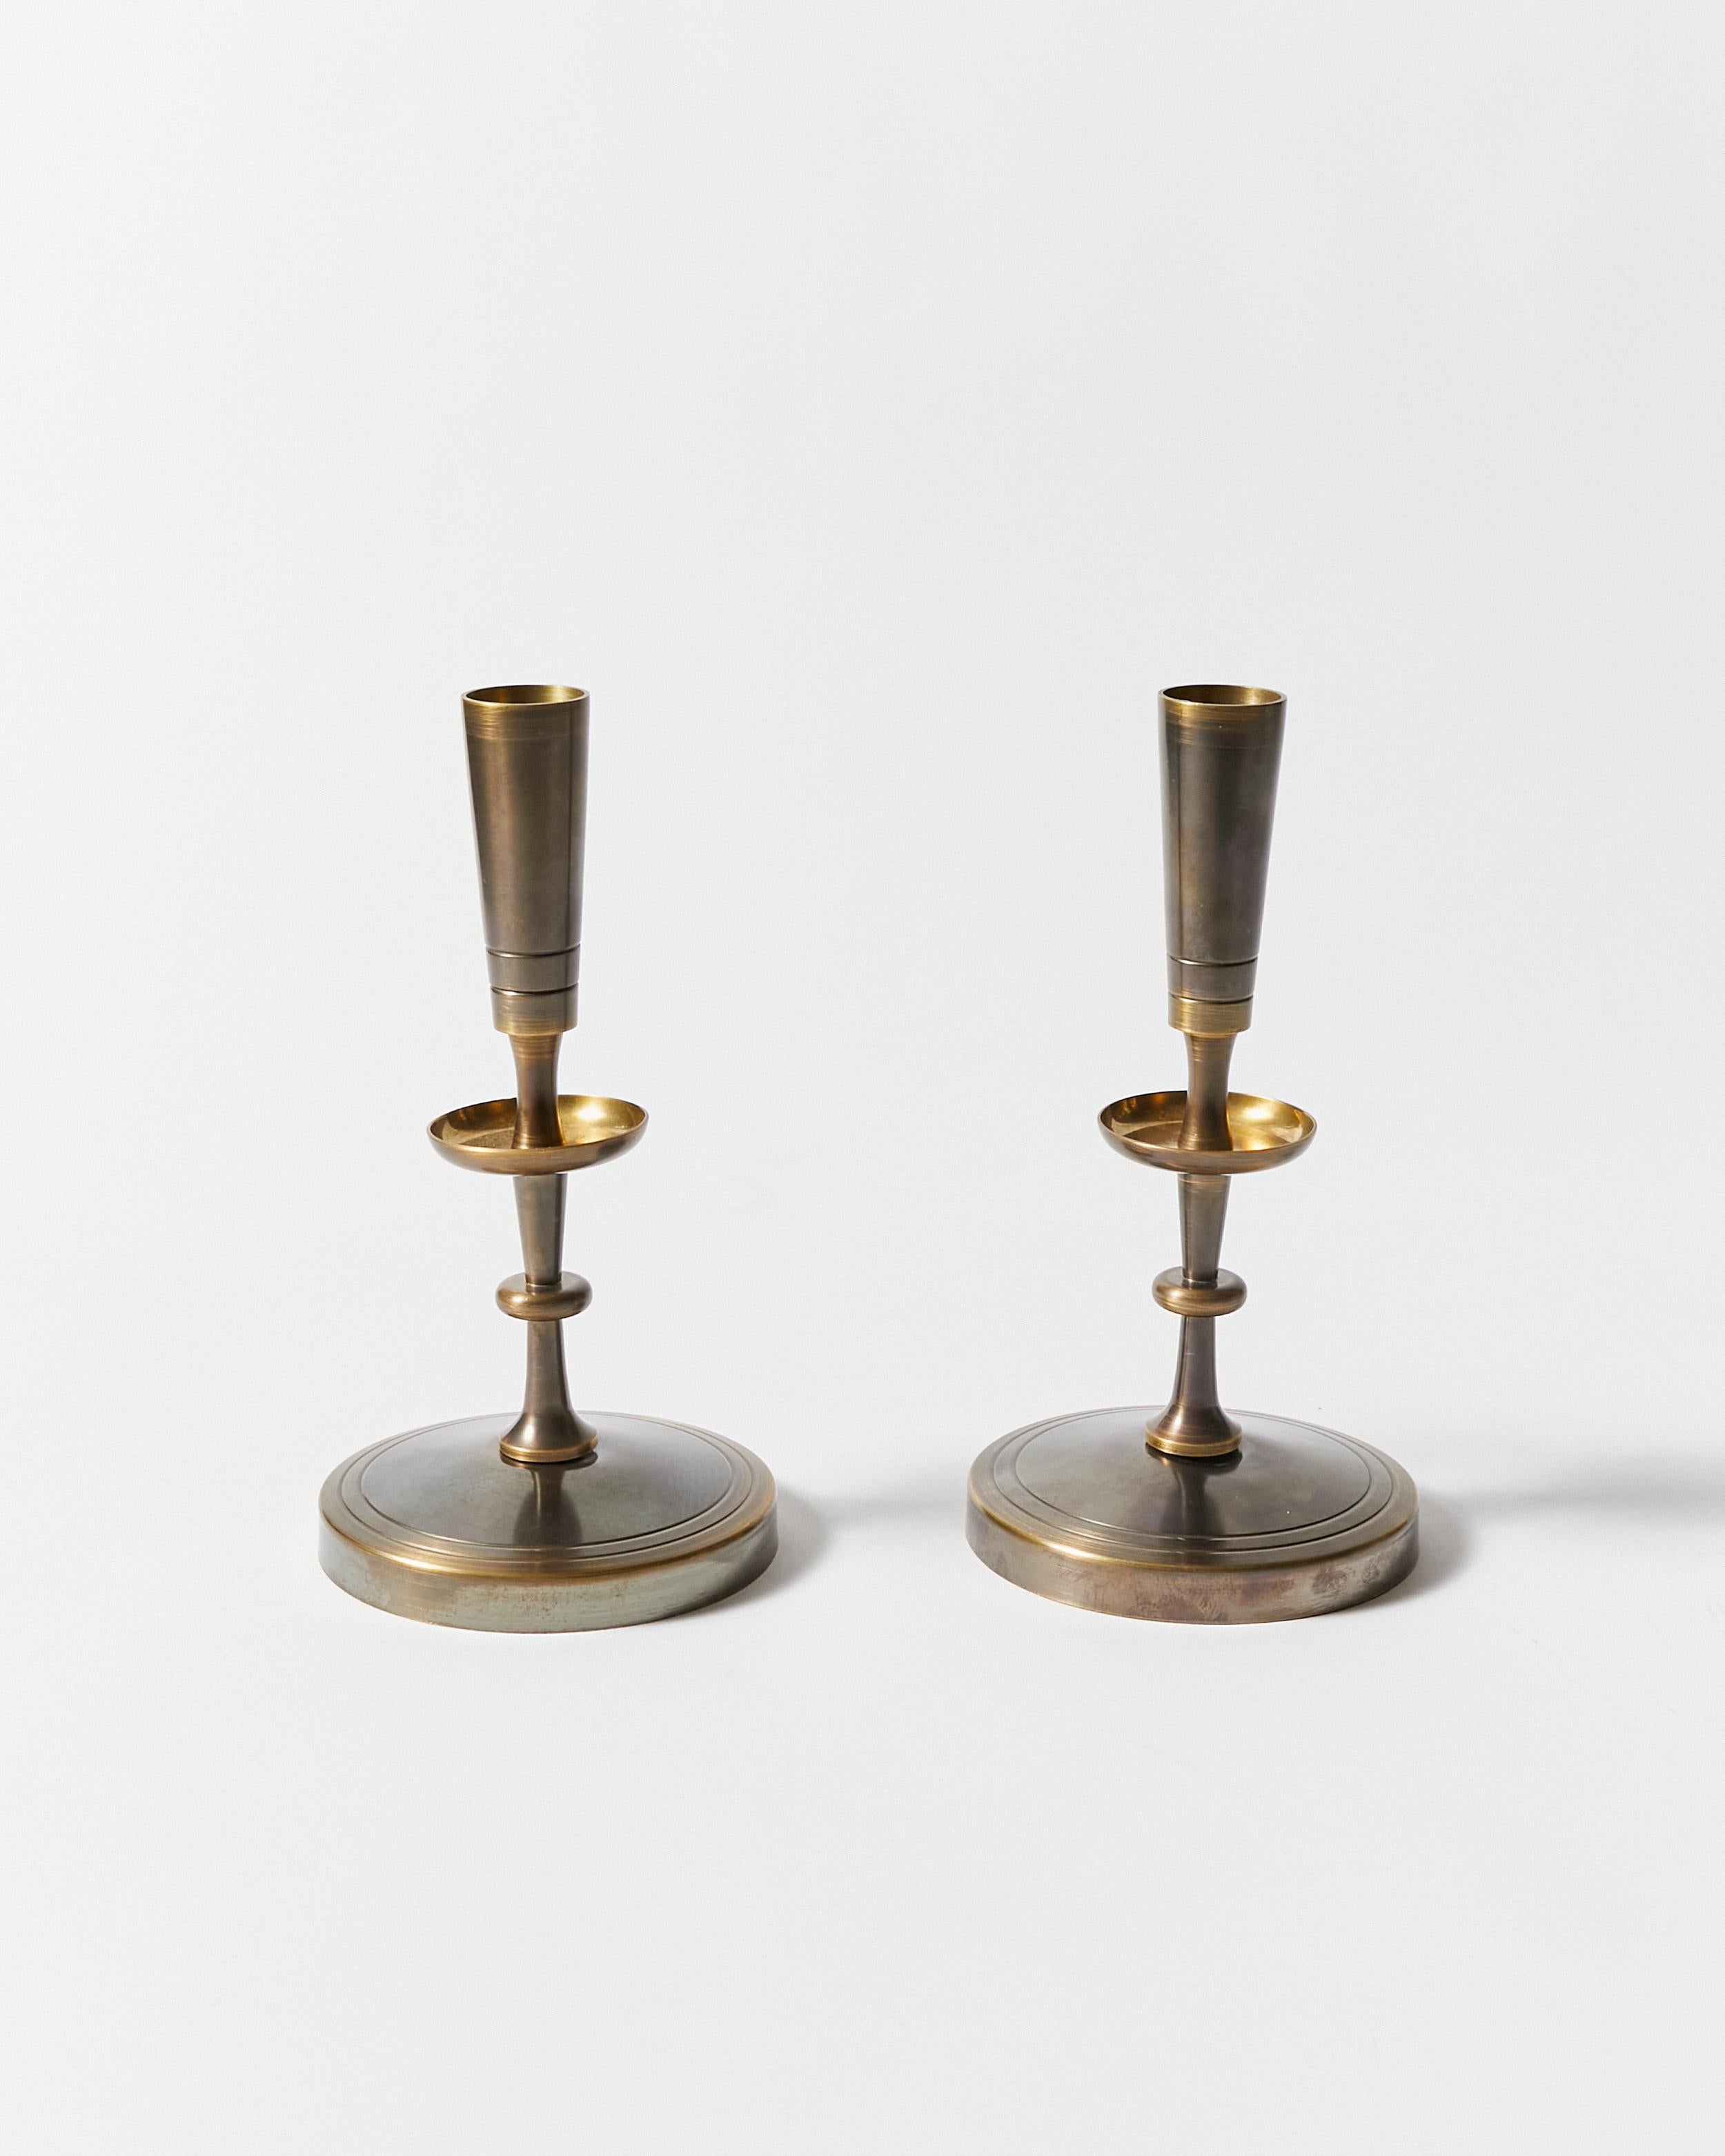 Set of two candlesticks re-finished in antique bronze. Designed by Tommy Parzinger for Dorlyn-Silversmiths.